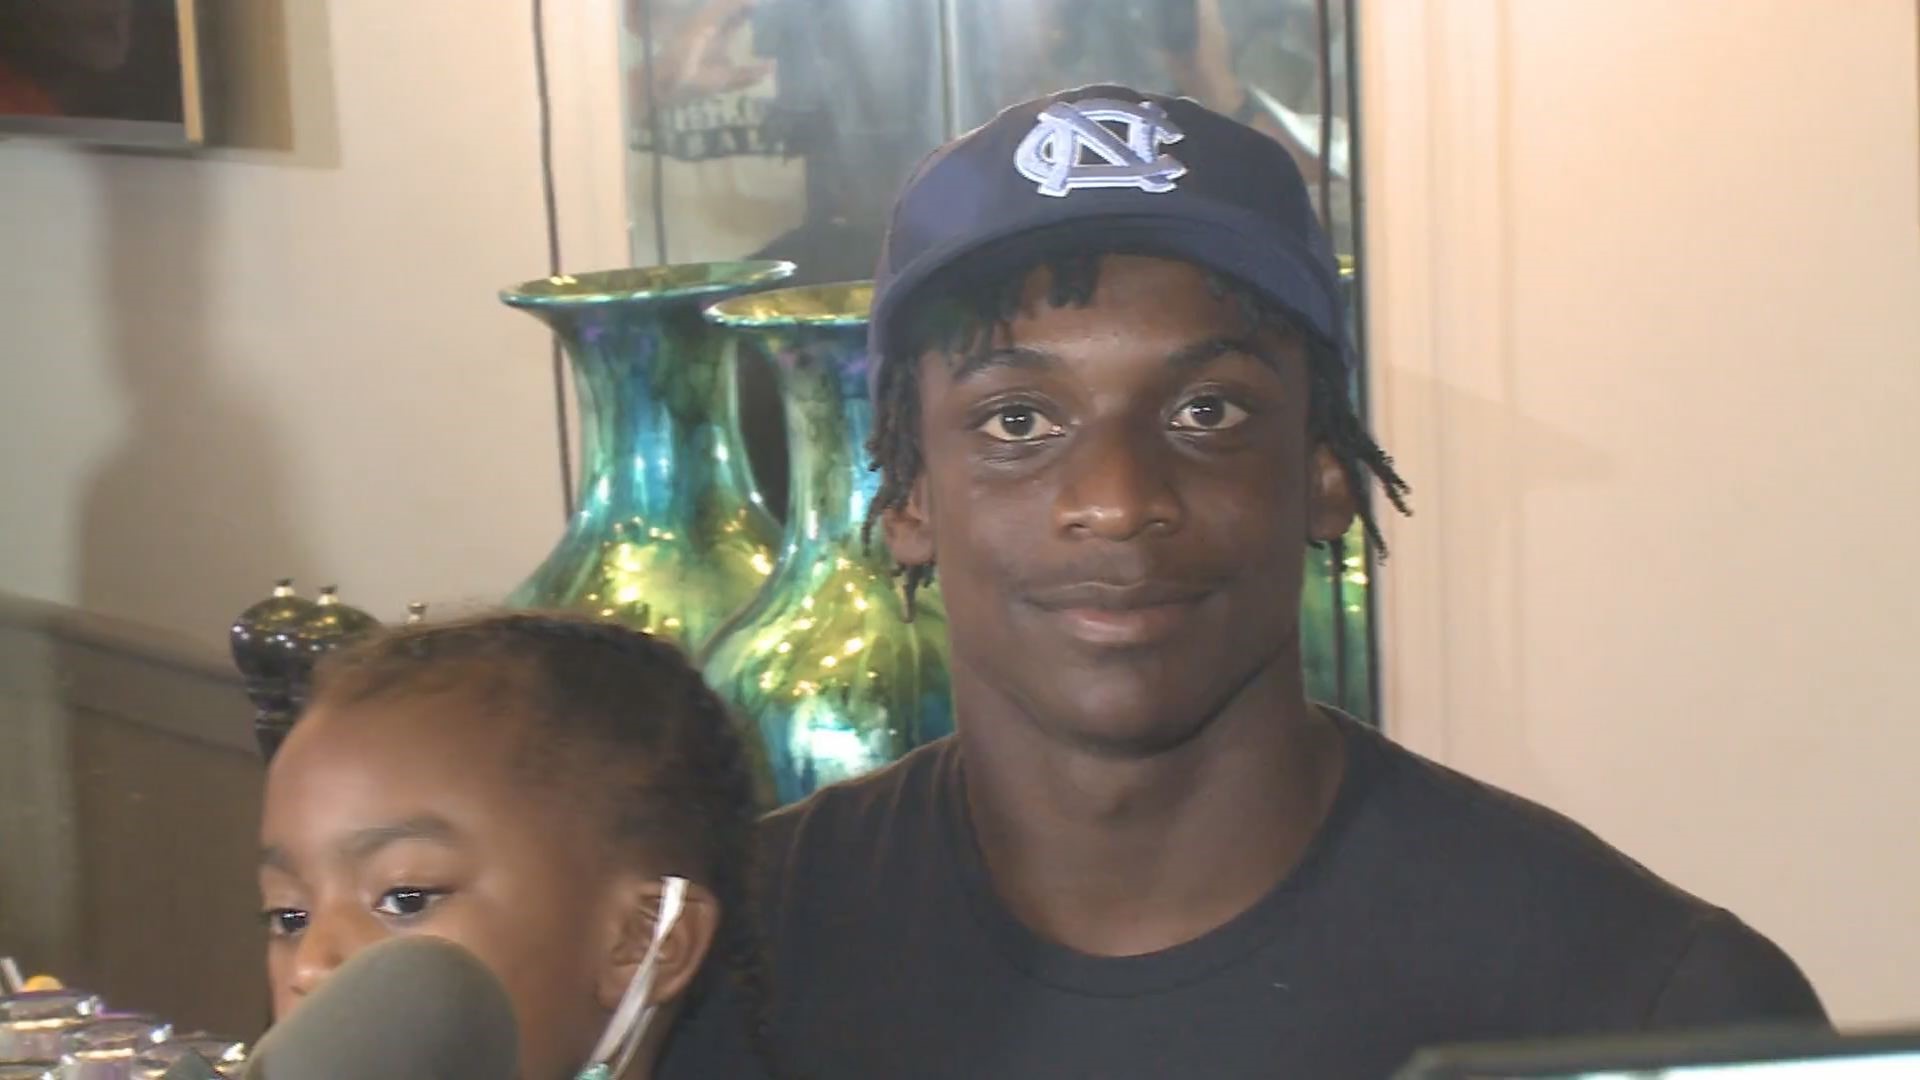 Tony Grimes is one of the top 10 high school prospects in the nation. He's headed to Chapel Hill.